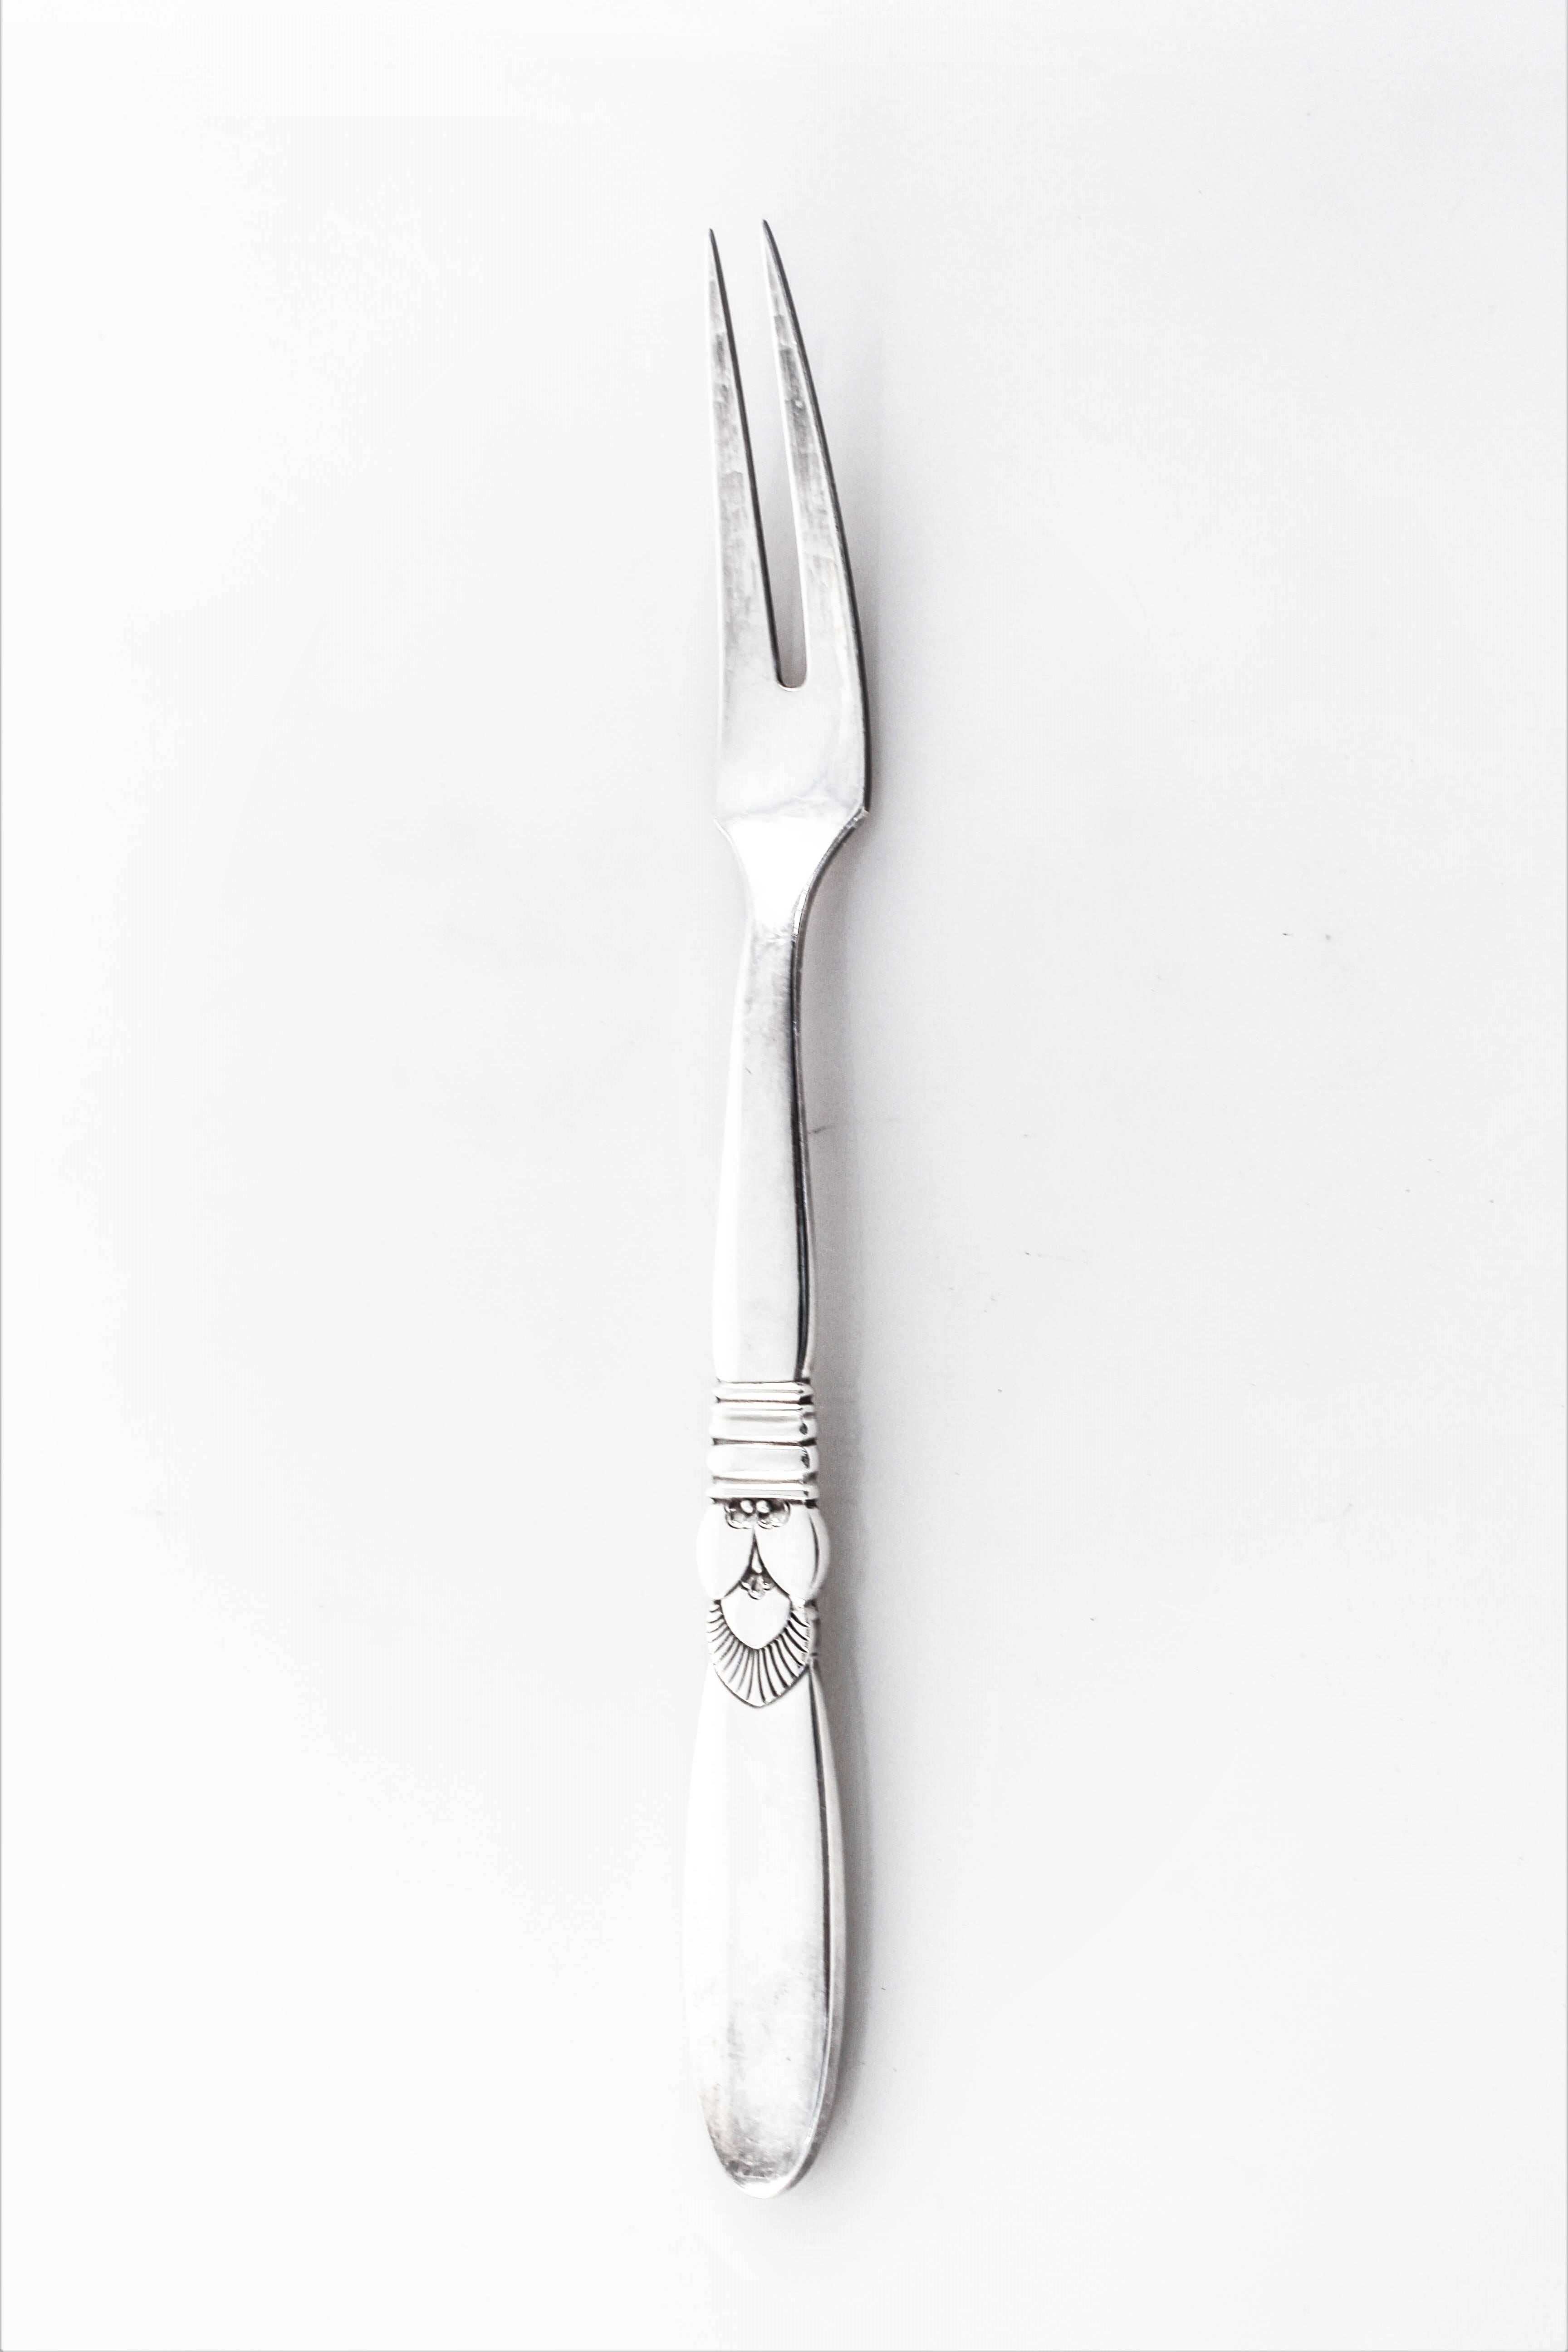 Cactus by Georg Jensen, an iconic pattern from a master silversmith. The look and craftsmanship that is distinctively Jensen. A (meat) fork and serving spoon, use together or apart.
 